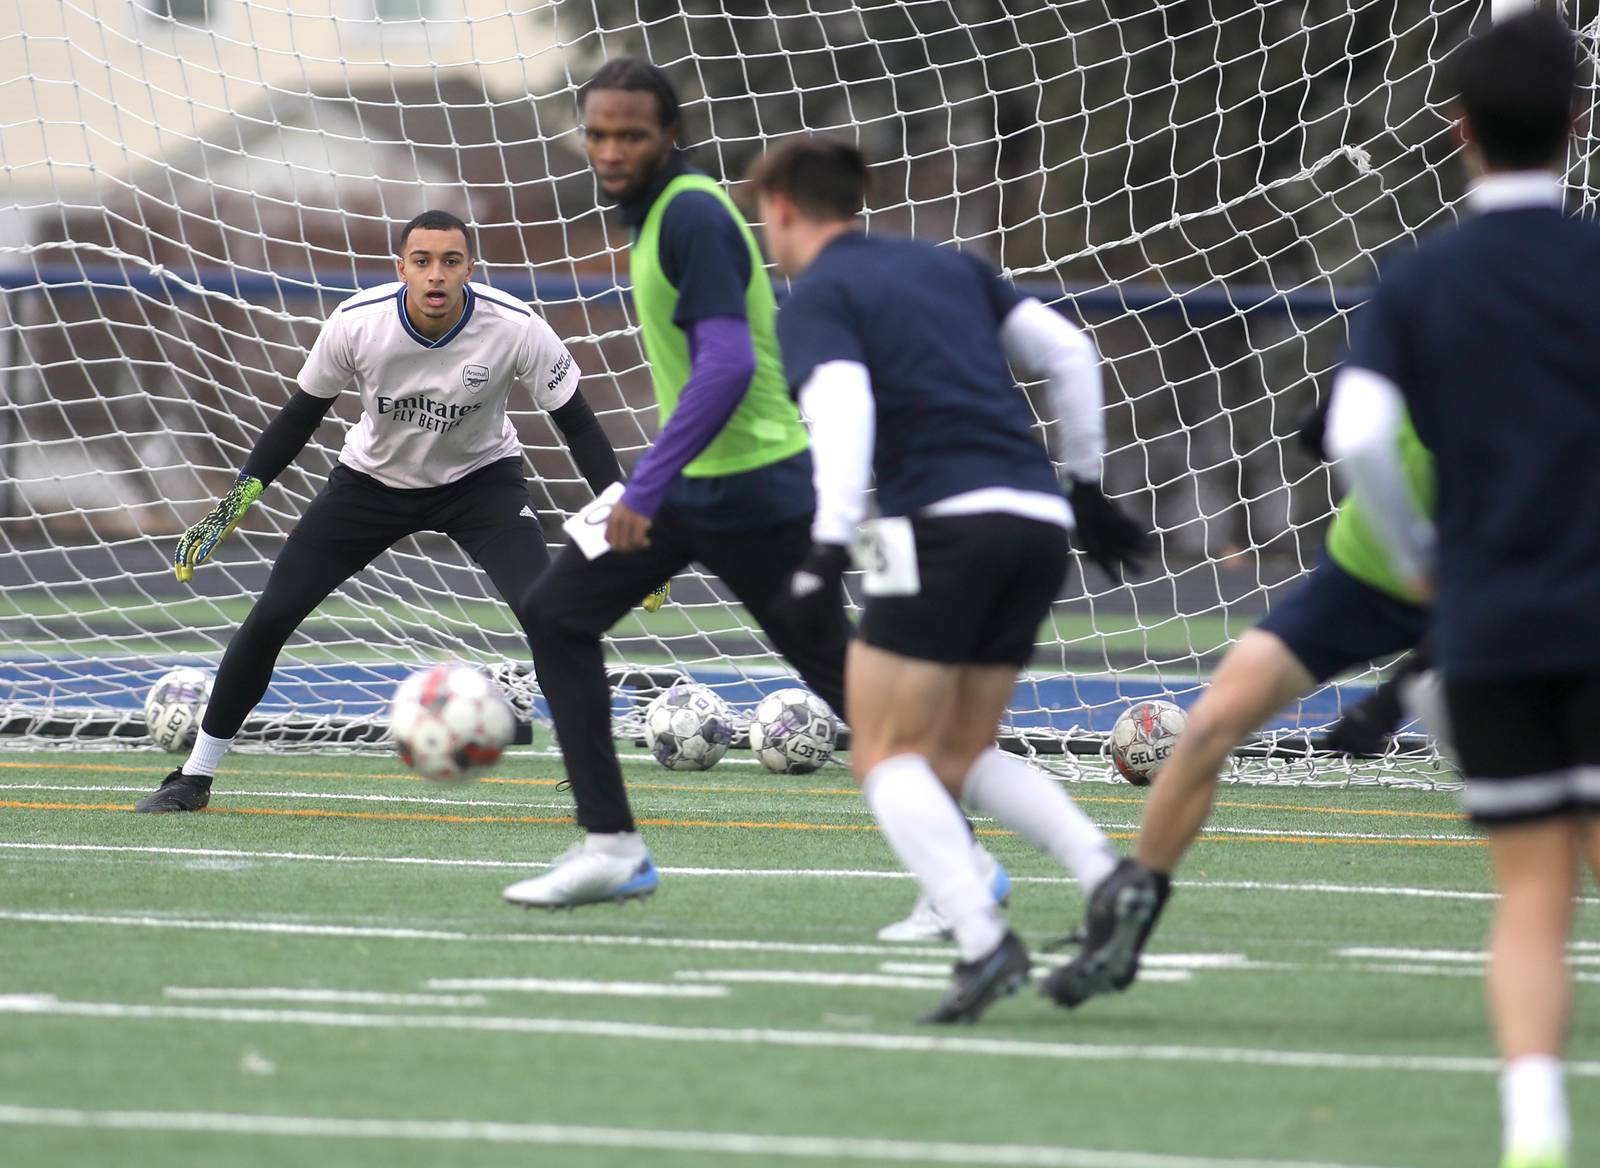 Kane County’s new semipro soccer franchise holding open tryouts Shaw